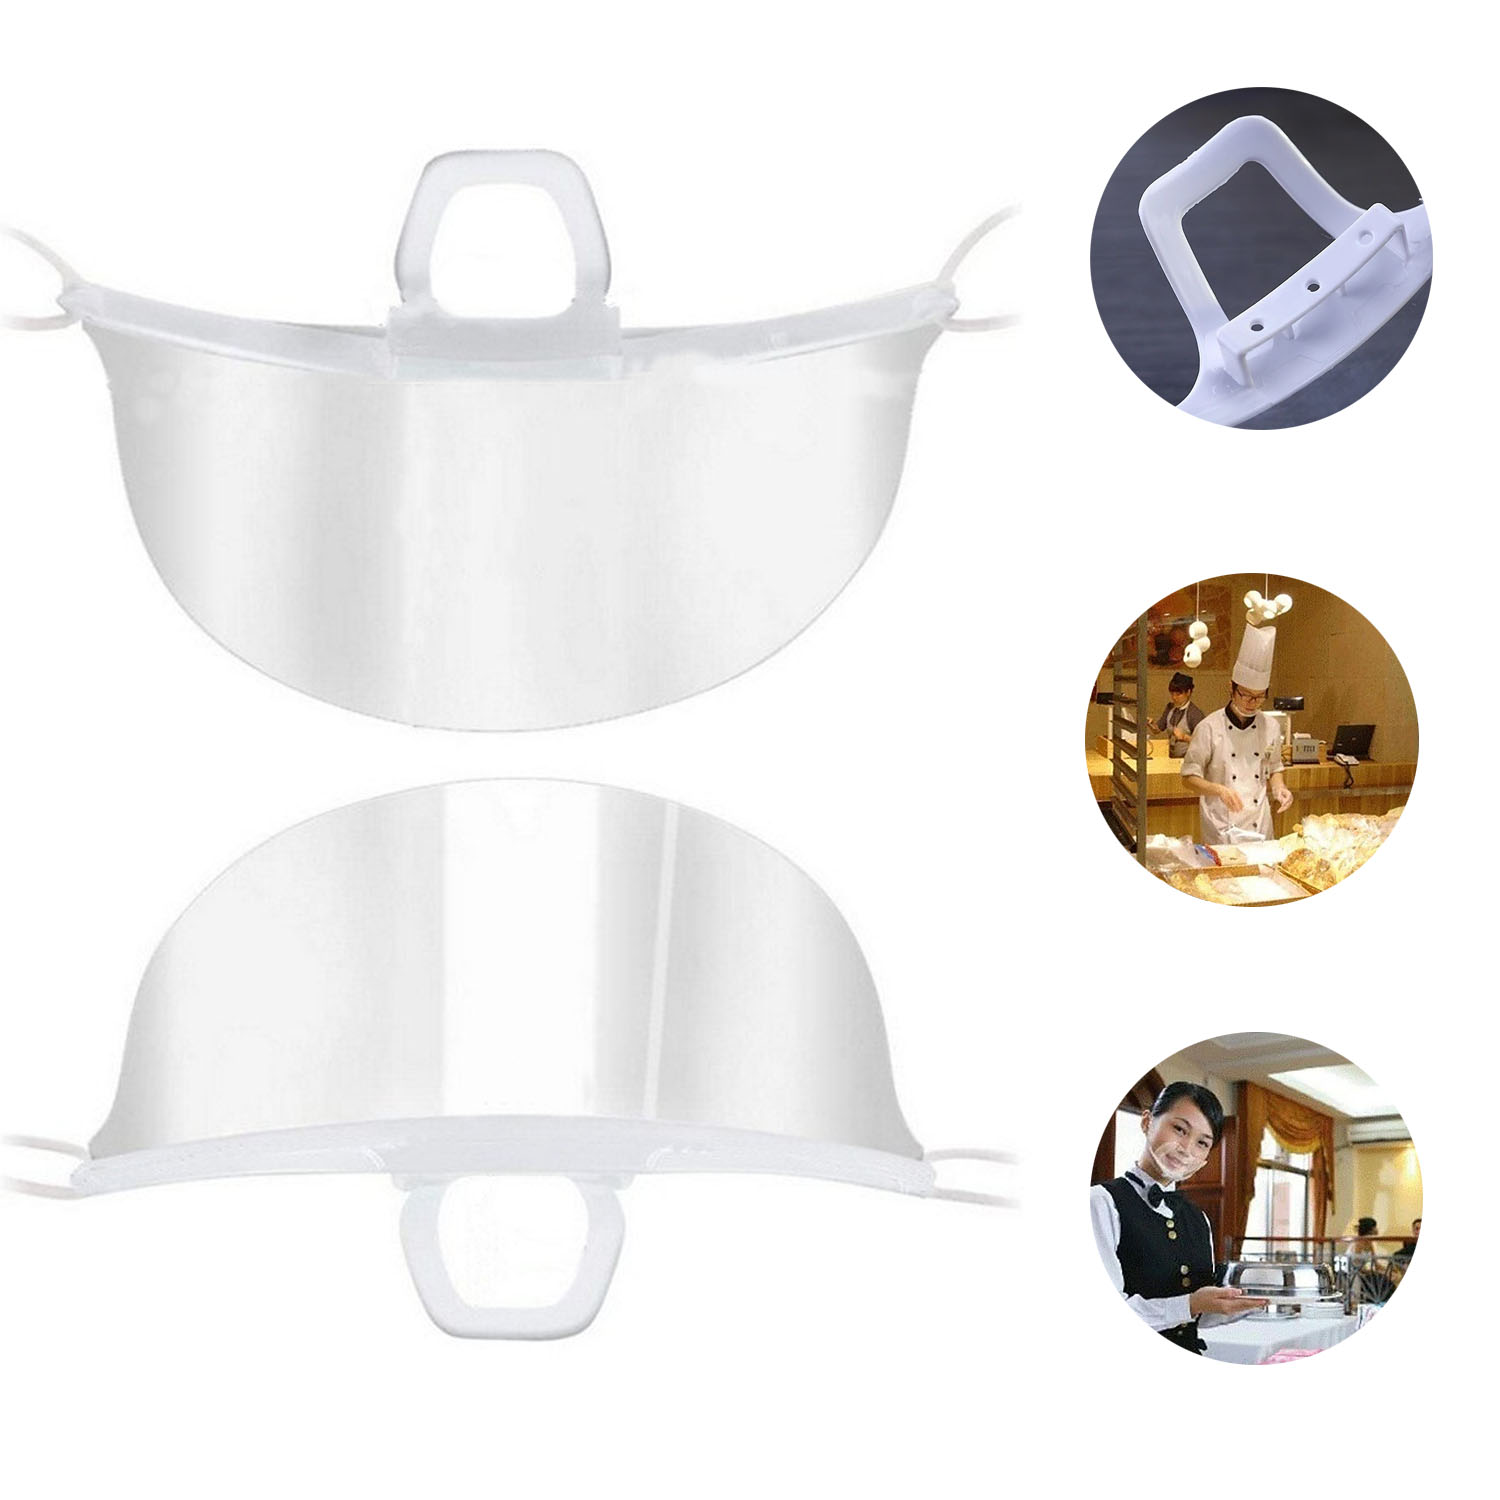 5 Pieces Clear Transparent Sanitary Mask Anti-Fog Face Mouth Shield Spit Guard Reusable Hotel Chef Waiter Plastic Kitchen Restaurant Masks